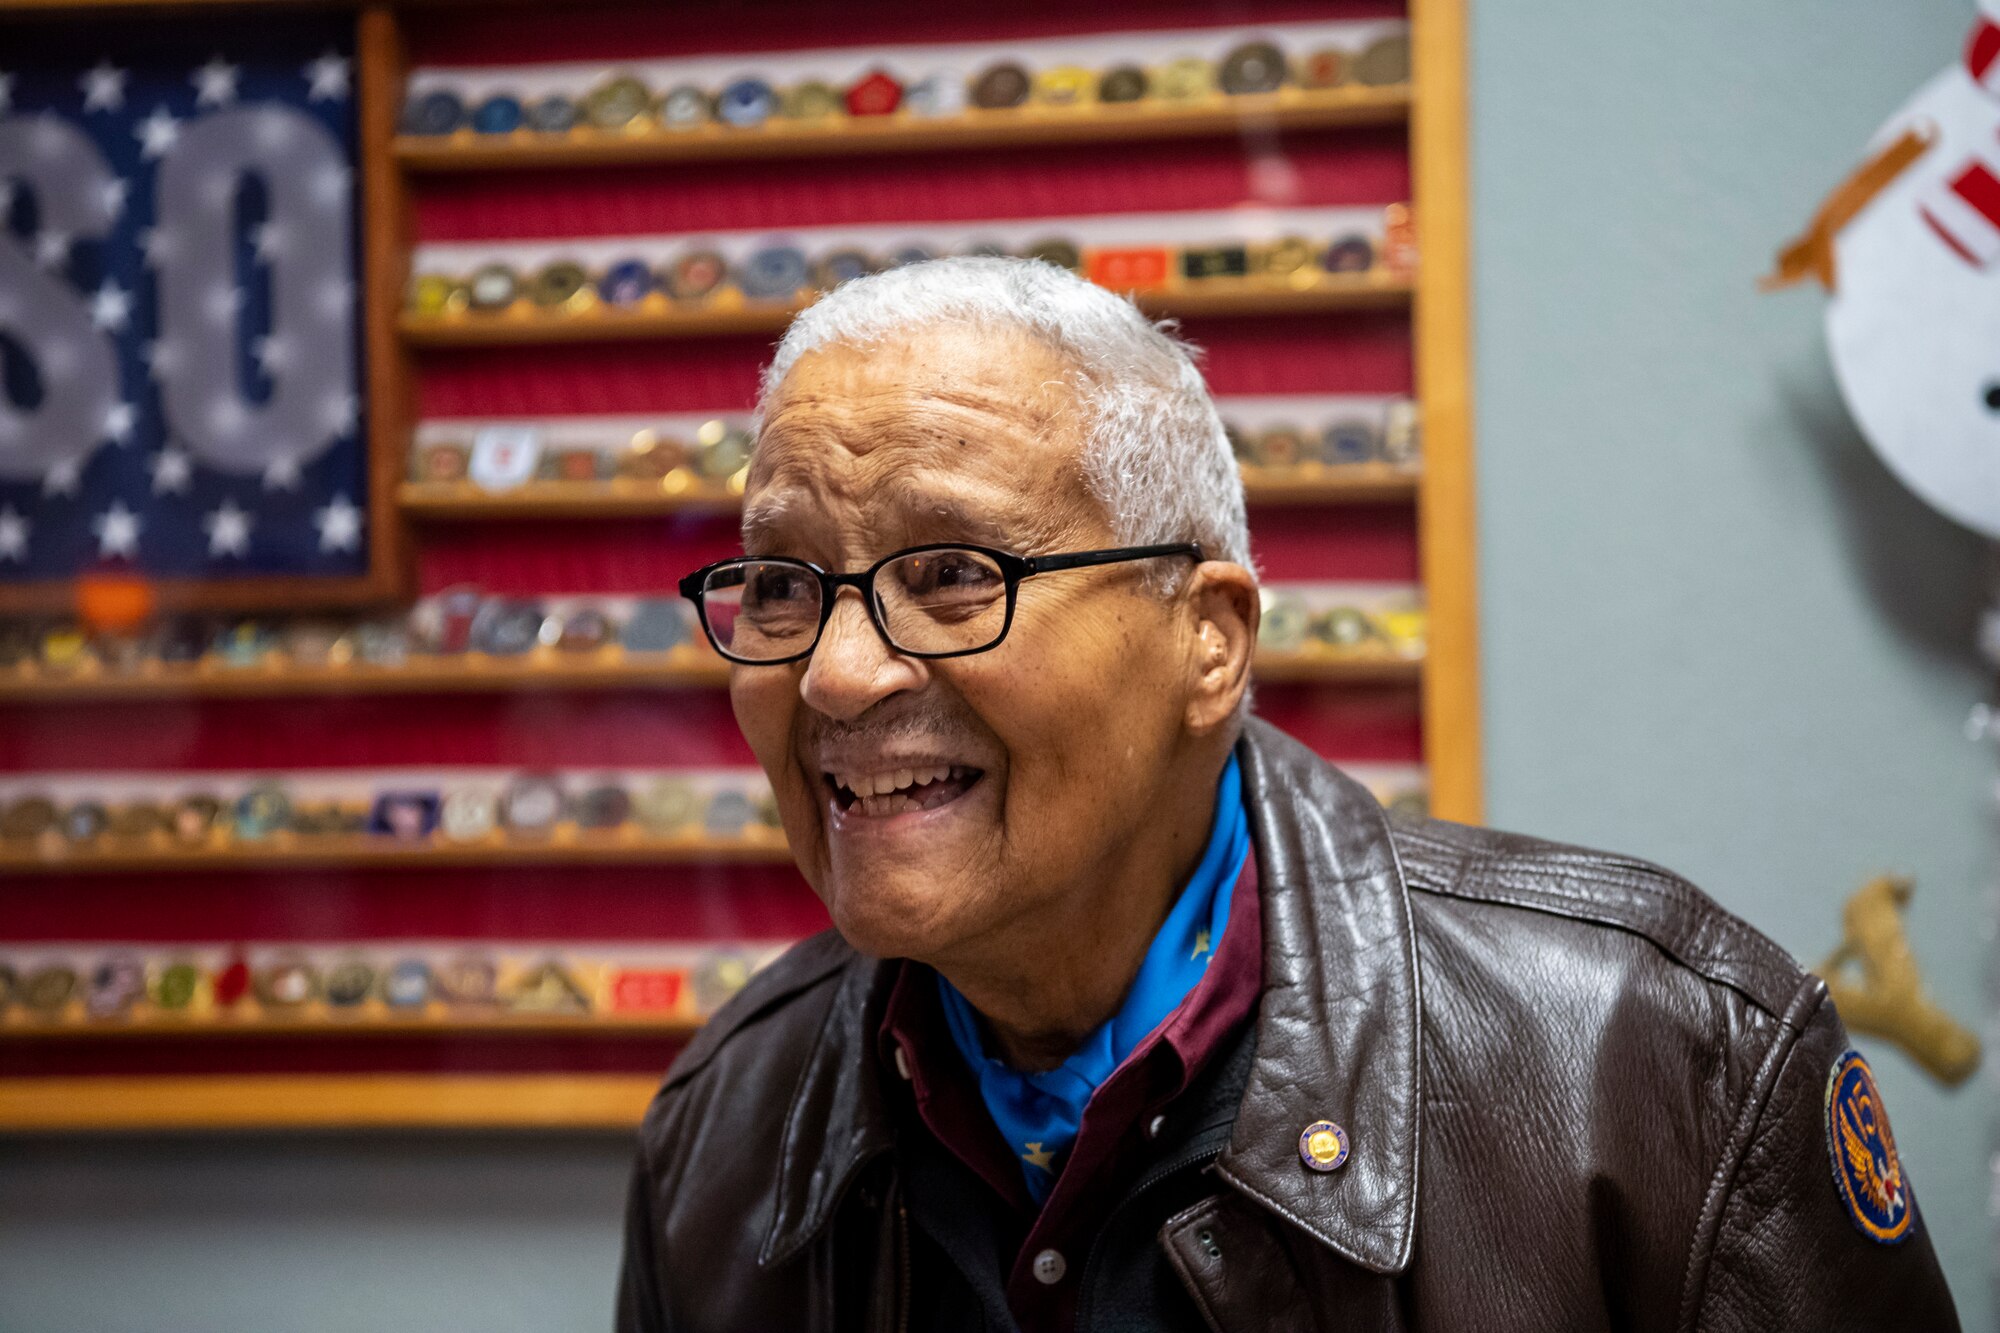 Former Tuskegee Airman, retired Col. Charles McGee, celebrates his birthday Dec. 6, 2019, at Dover Air Force Base, Del. McGee was born in Cleveland, Ohio, Dec. 7, 1919. He served a total of 30 years in the U.S. Air Force, beginning with the U.S. Army Air Corps, and flew a total of 409 combat missions in World War II, Korea and Vietnam. The Tuskegee program began in 1941 when the 99th Pursuit Squadron was established, and its Airmen were the first ever African-American military aviators in the U.S. Army Air Corps. (U.S. Air Force photo by Senior Airman Christopher Quail)